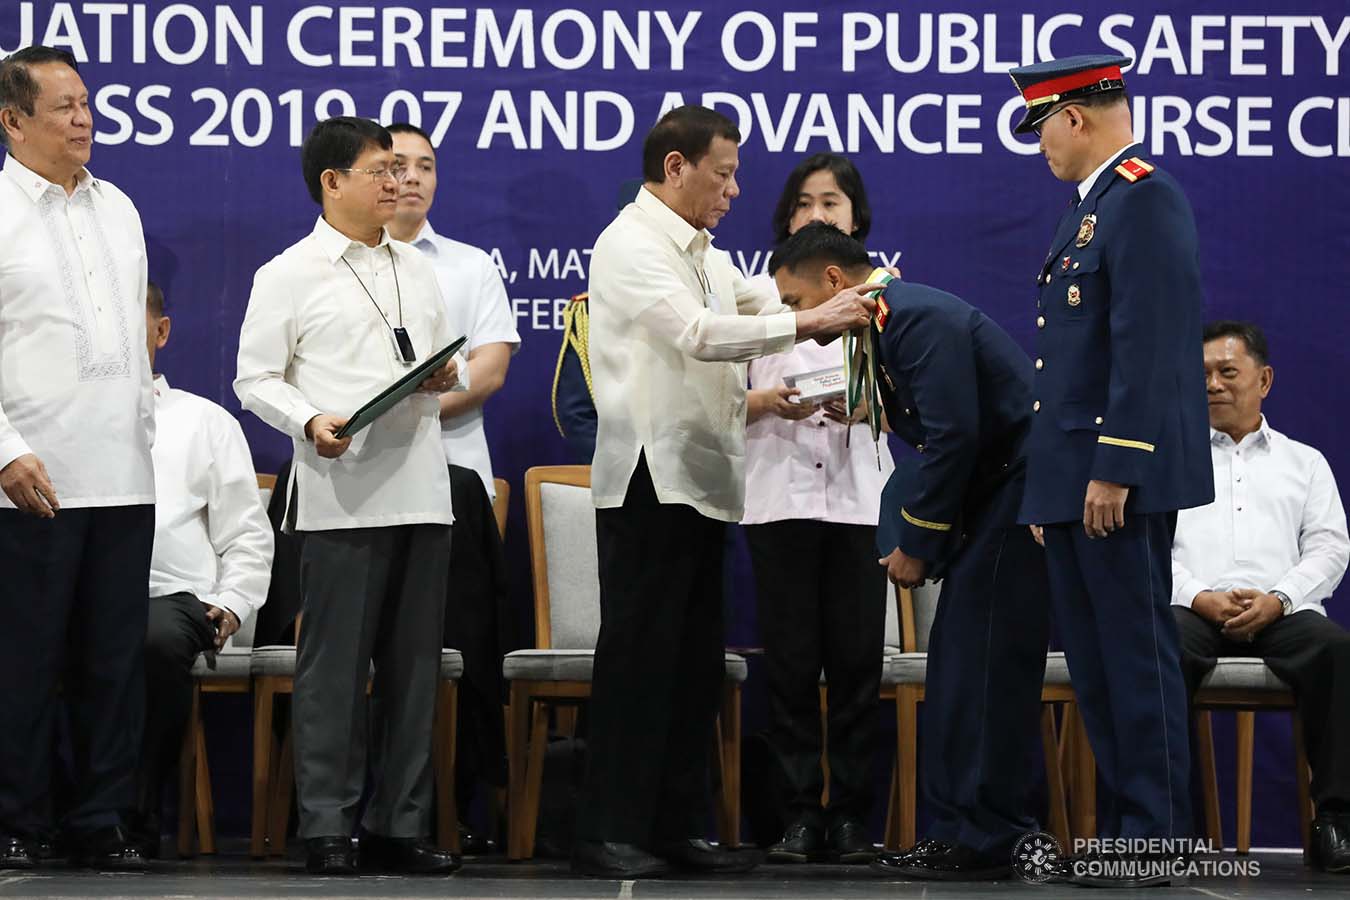 President Rodrigo Roa Duterte confers a medal to one of the awardees during the joint graduation ceremony of Public Safety Officers Basic Course Class 2019-07 and Advance Course Class 2019-18 at the Arcadia Active Lifestyle Center in Davao City on February 20, 2020. TOTO LOZANO/PRESIDENTIAL PHOTO